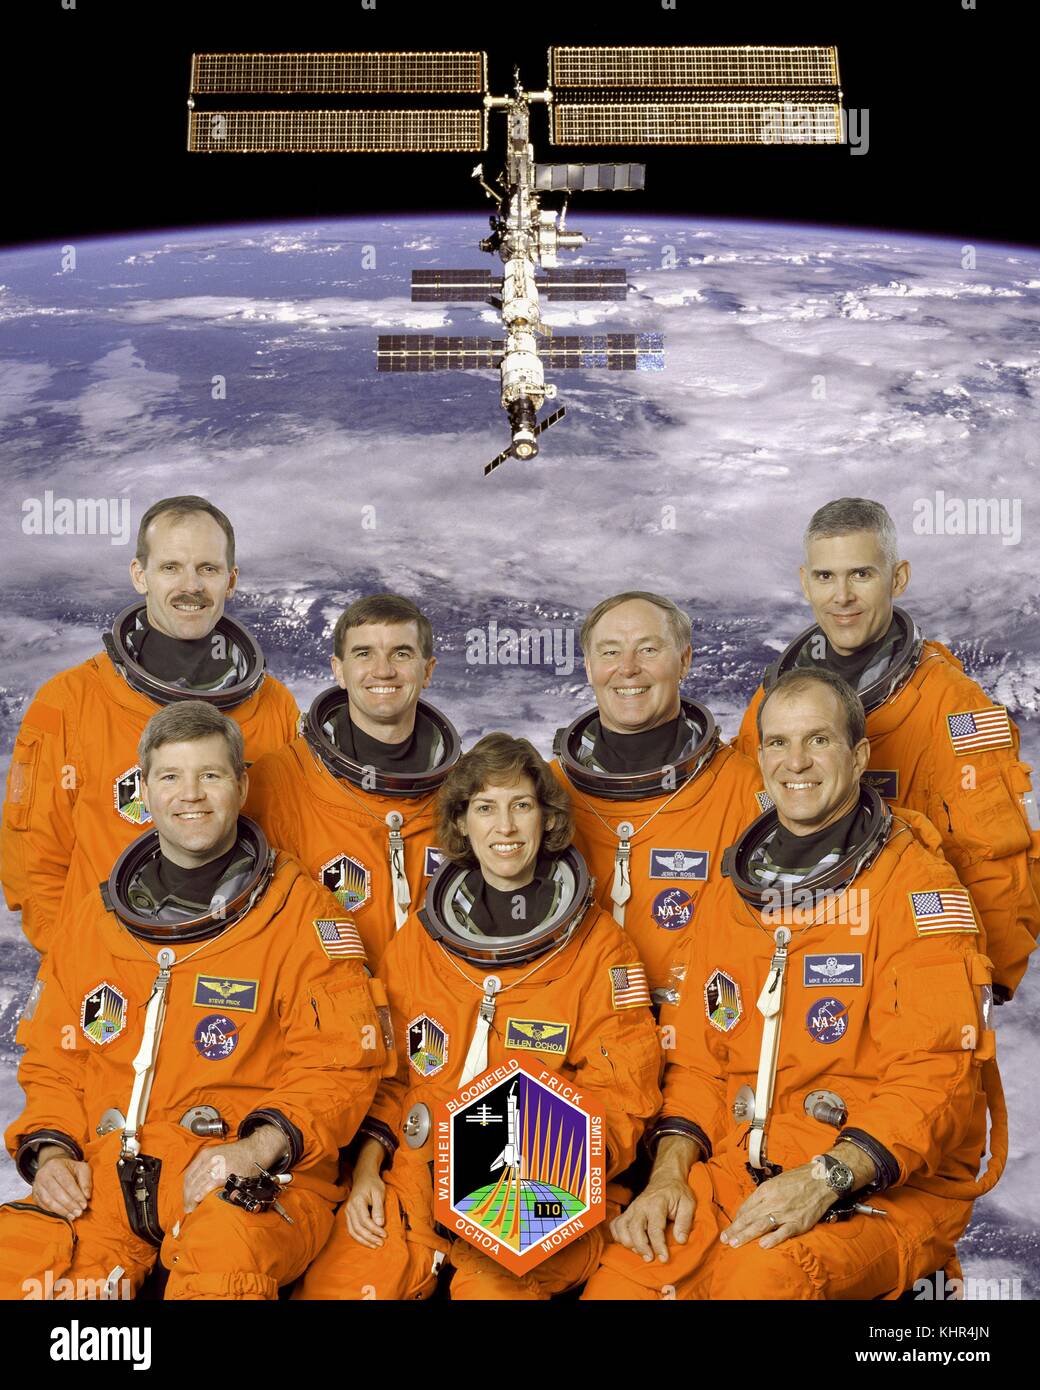 Official NASA portrait of Space Shuttle Atlantis STS-110 International Space Station mission prime crew astronauts (back, L-R) Steven Smith, Rex Walheim, Jerry Ross, Lee Morin, (front, L-R) Stephen Frick, Ellen Ochoa, and Michael Bloomfield in orange launch and entry spacesuits at the Johnson Space Center December 16, 2001 in Houston, Texas.  (photo by NASA Photo via Planetpix) Stock Photo